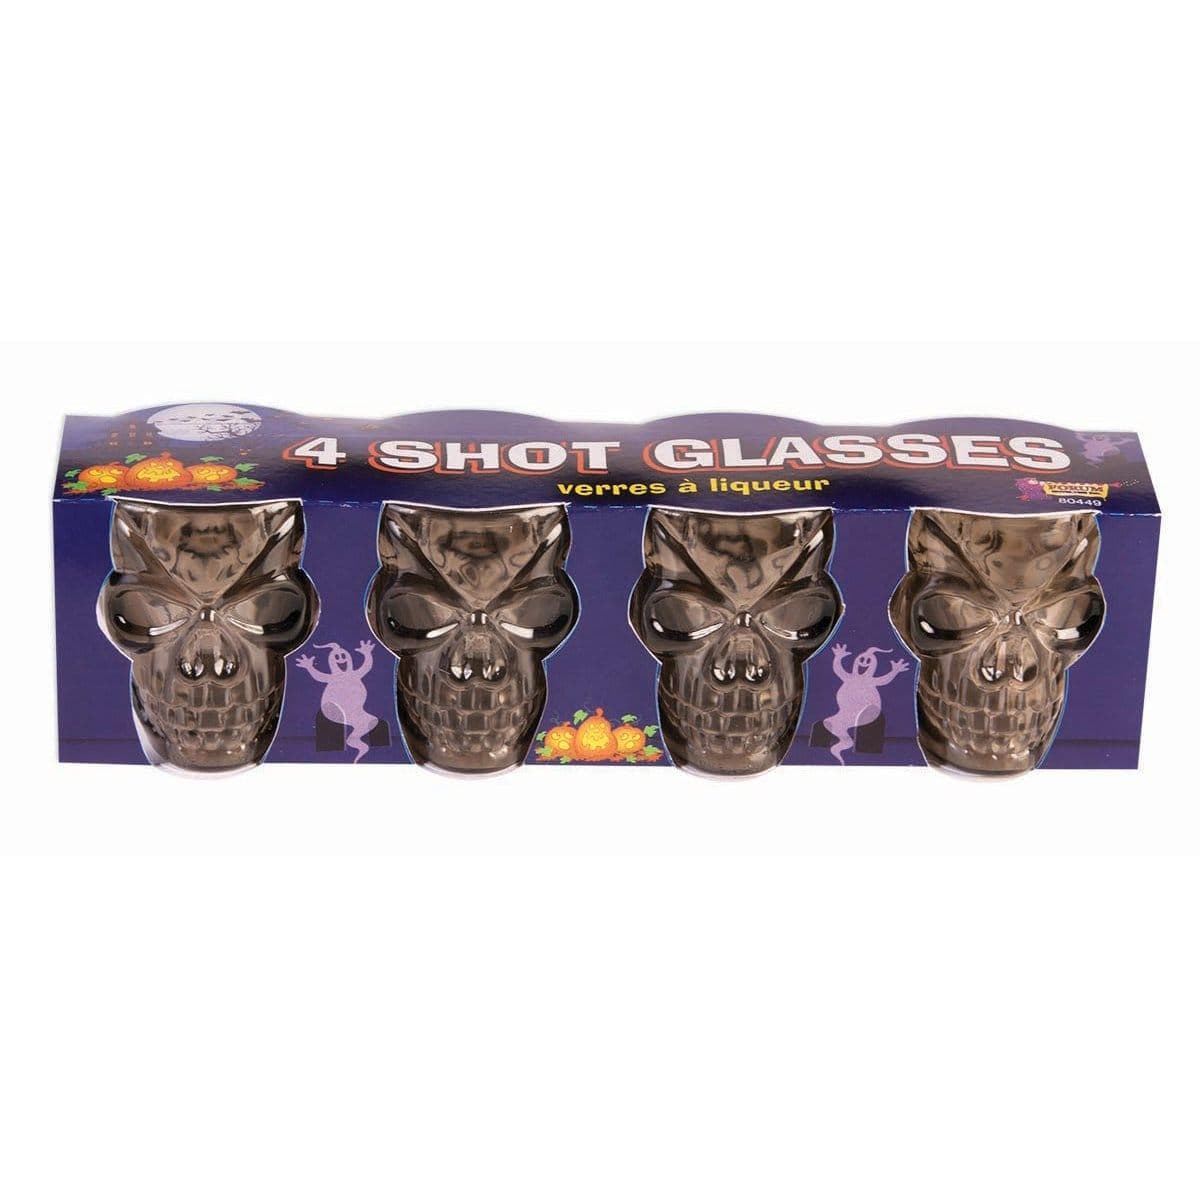 Buy Halloween Skull shooter glasses, 4 per package sold at Party Expert